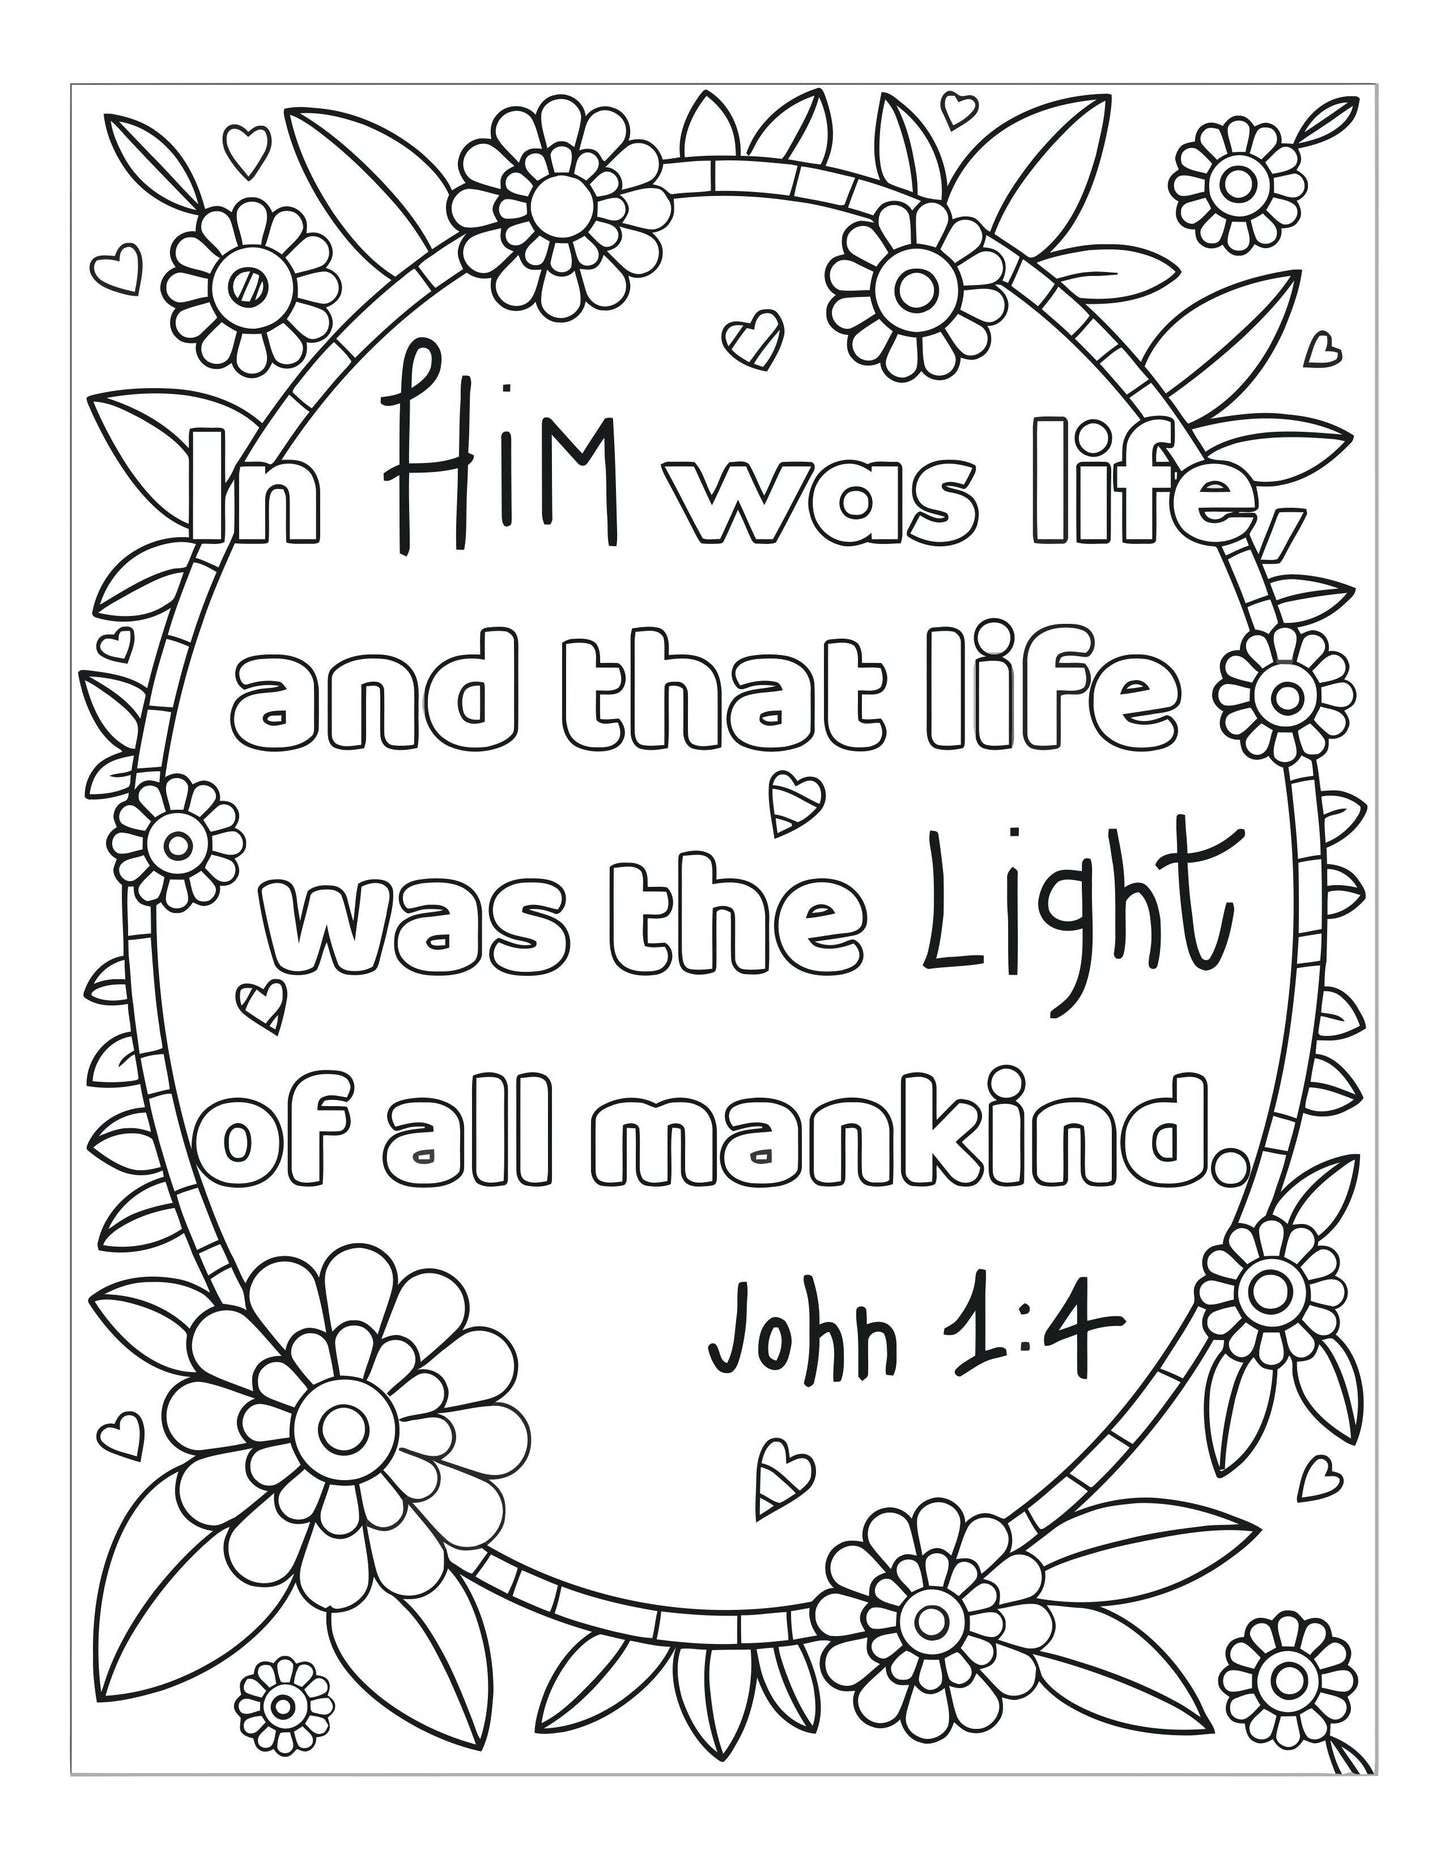 Bible Memory Verse Coloring Book (31 Pages) download only - Sunday School Store 